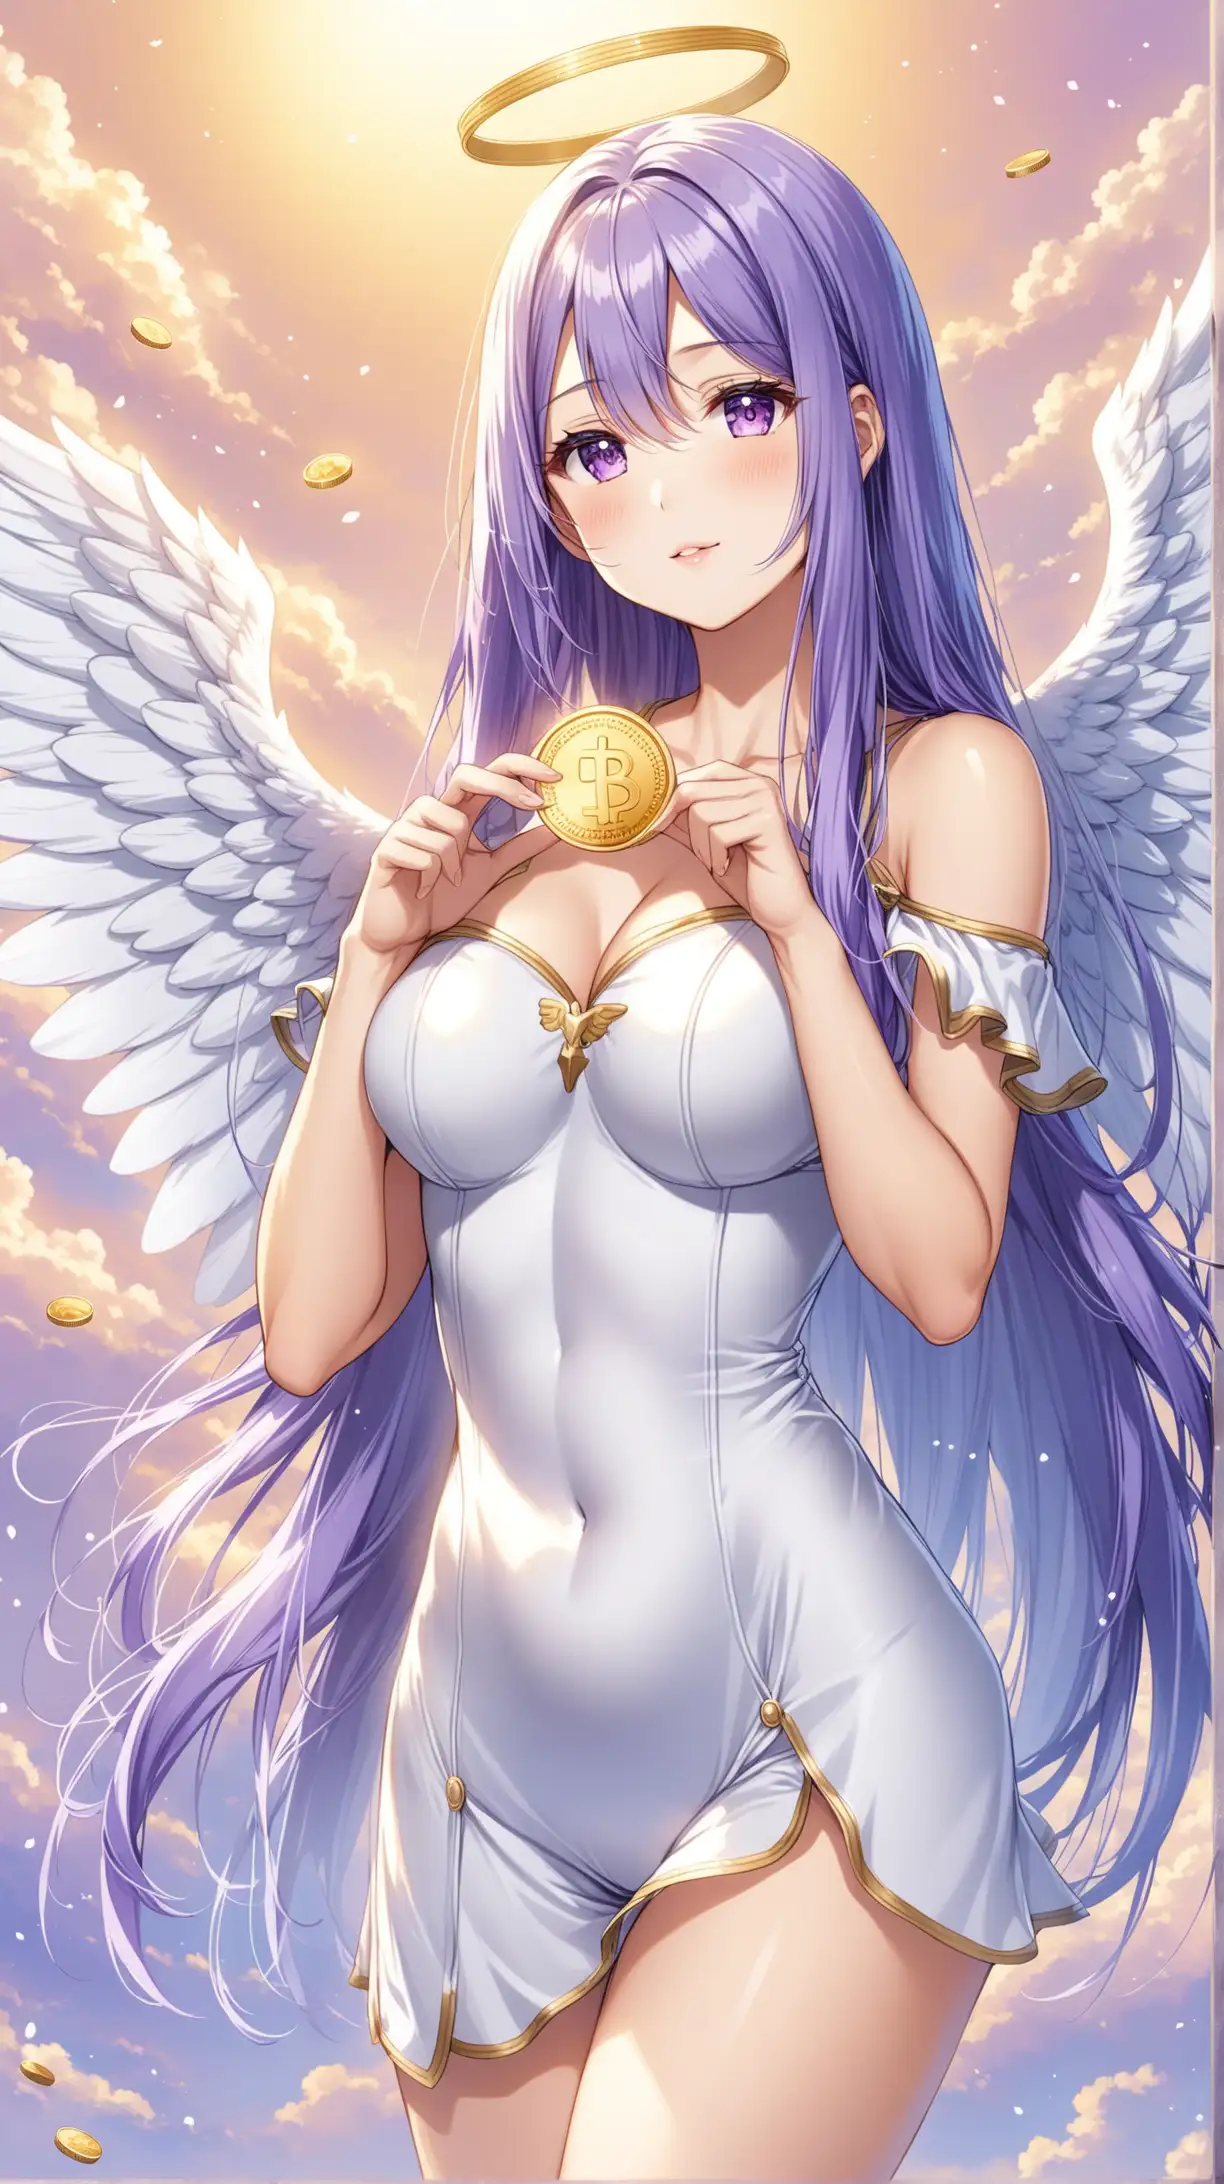 Sexy girl carry coin, grey angel costume, white wing, purple long hair, medium short, heaven background.